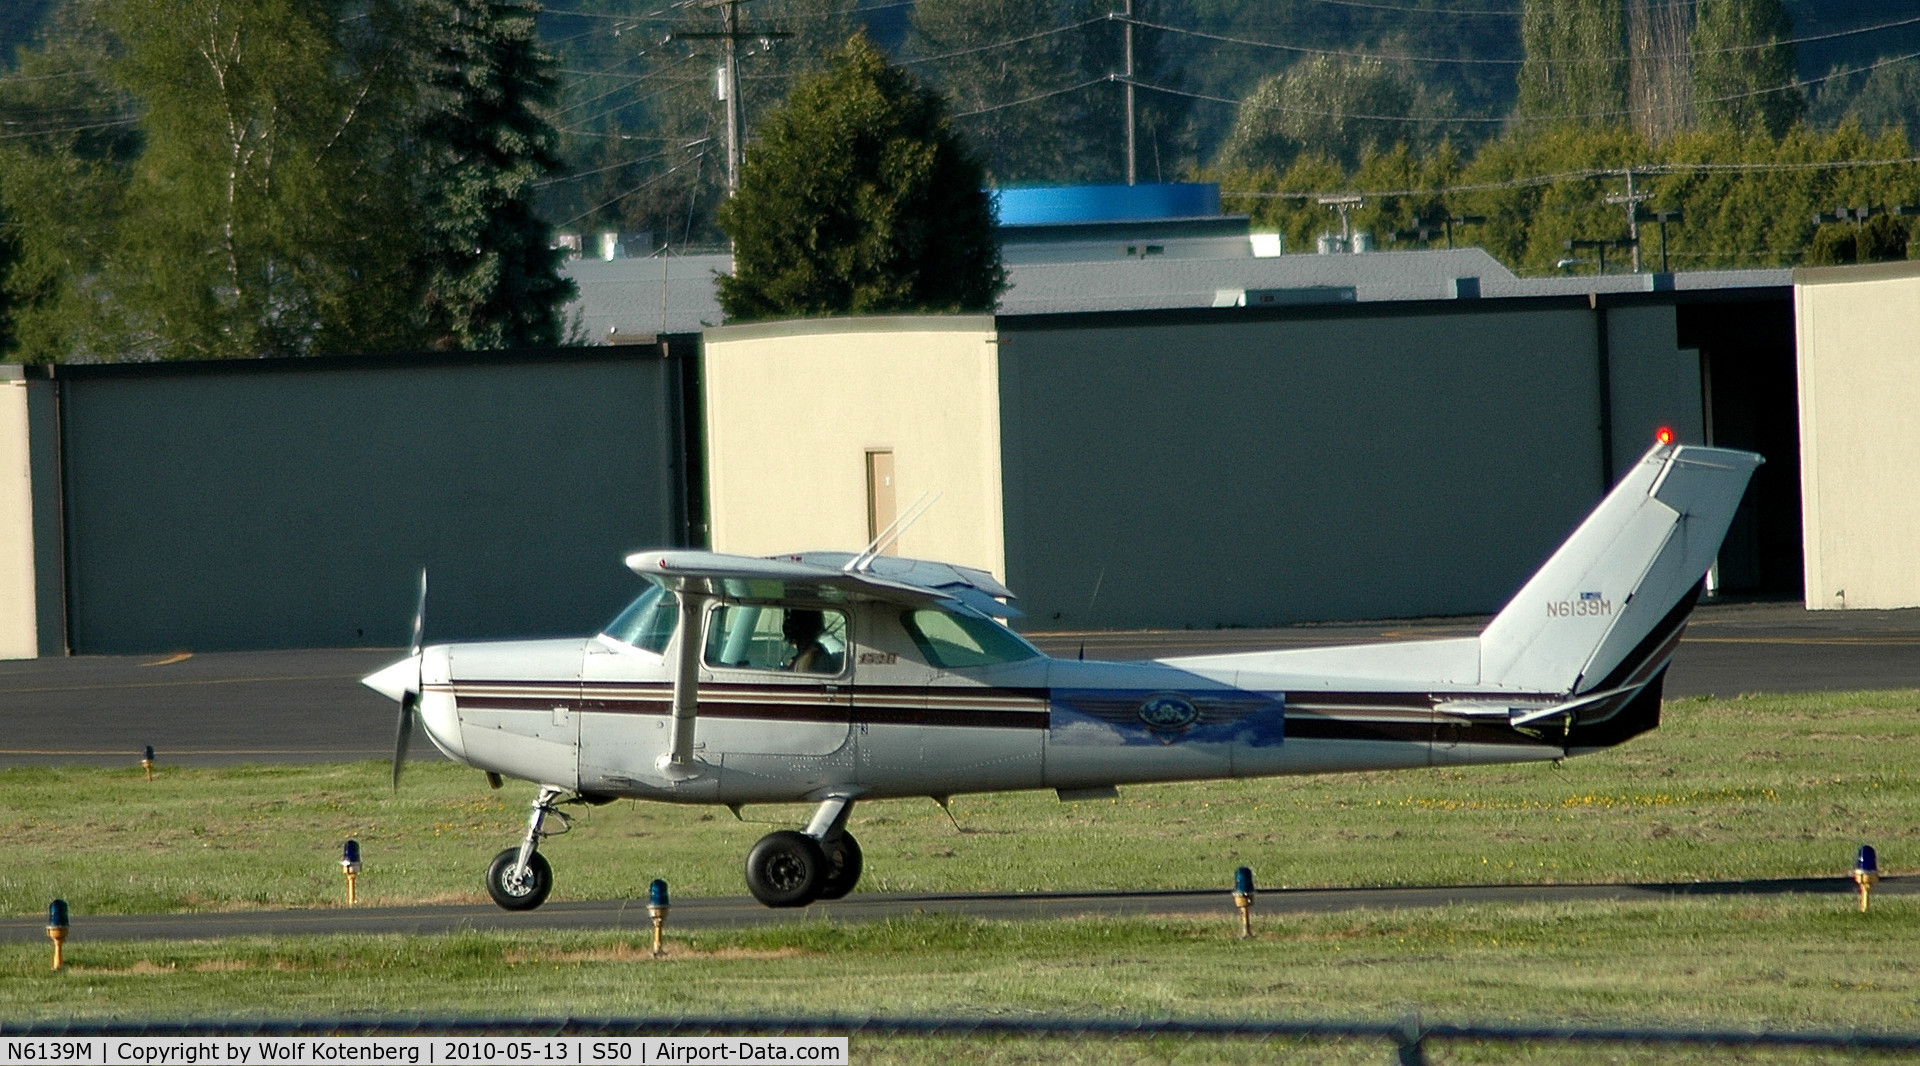 N6139M, 1980 Cessna 152 C/N 15284630, rolling towart the active